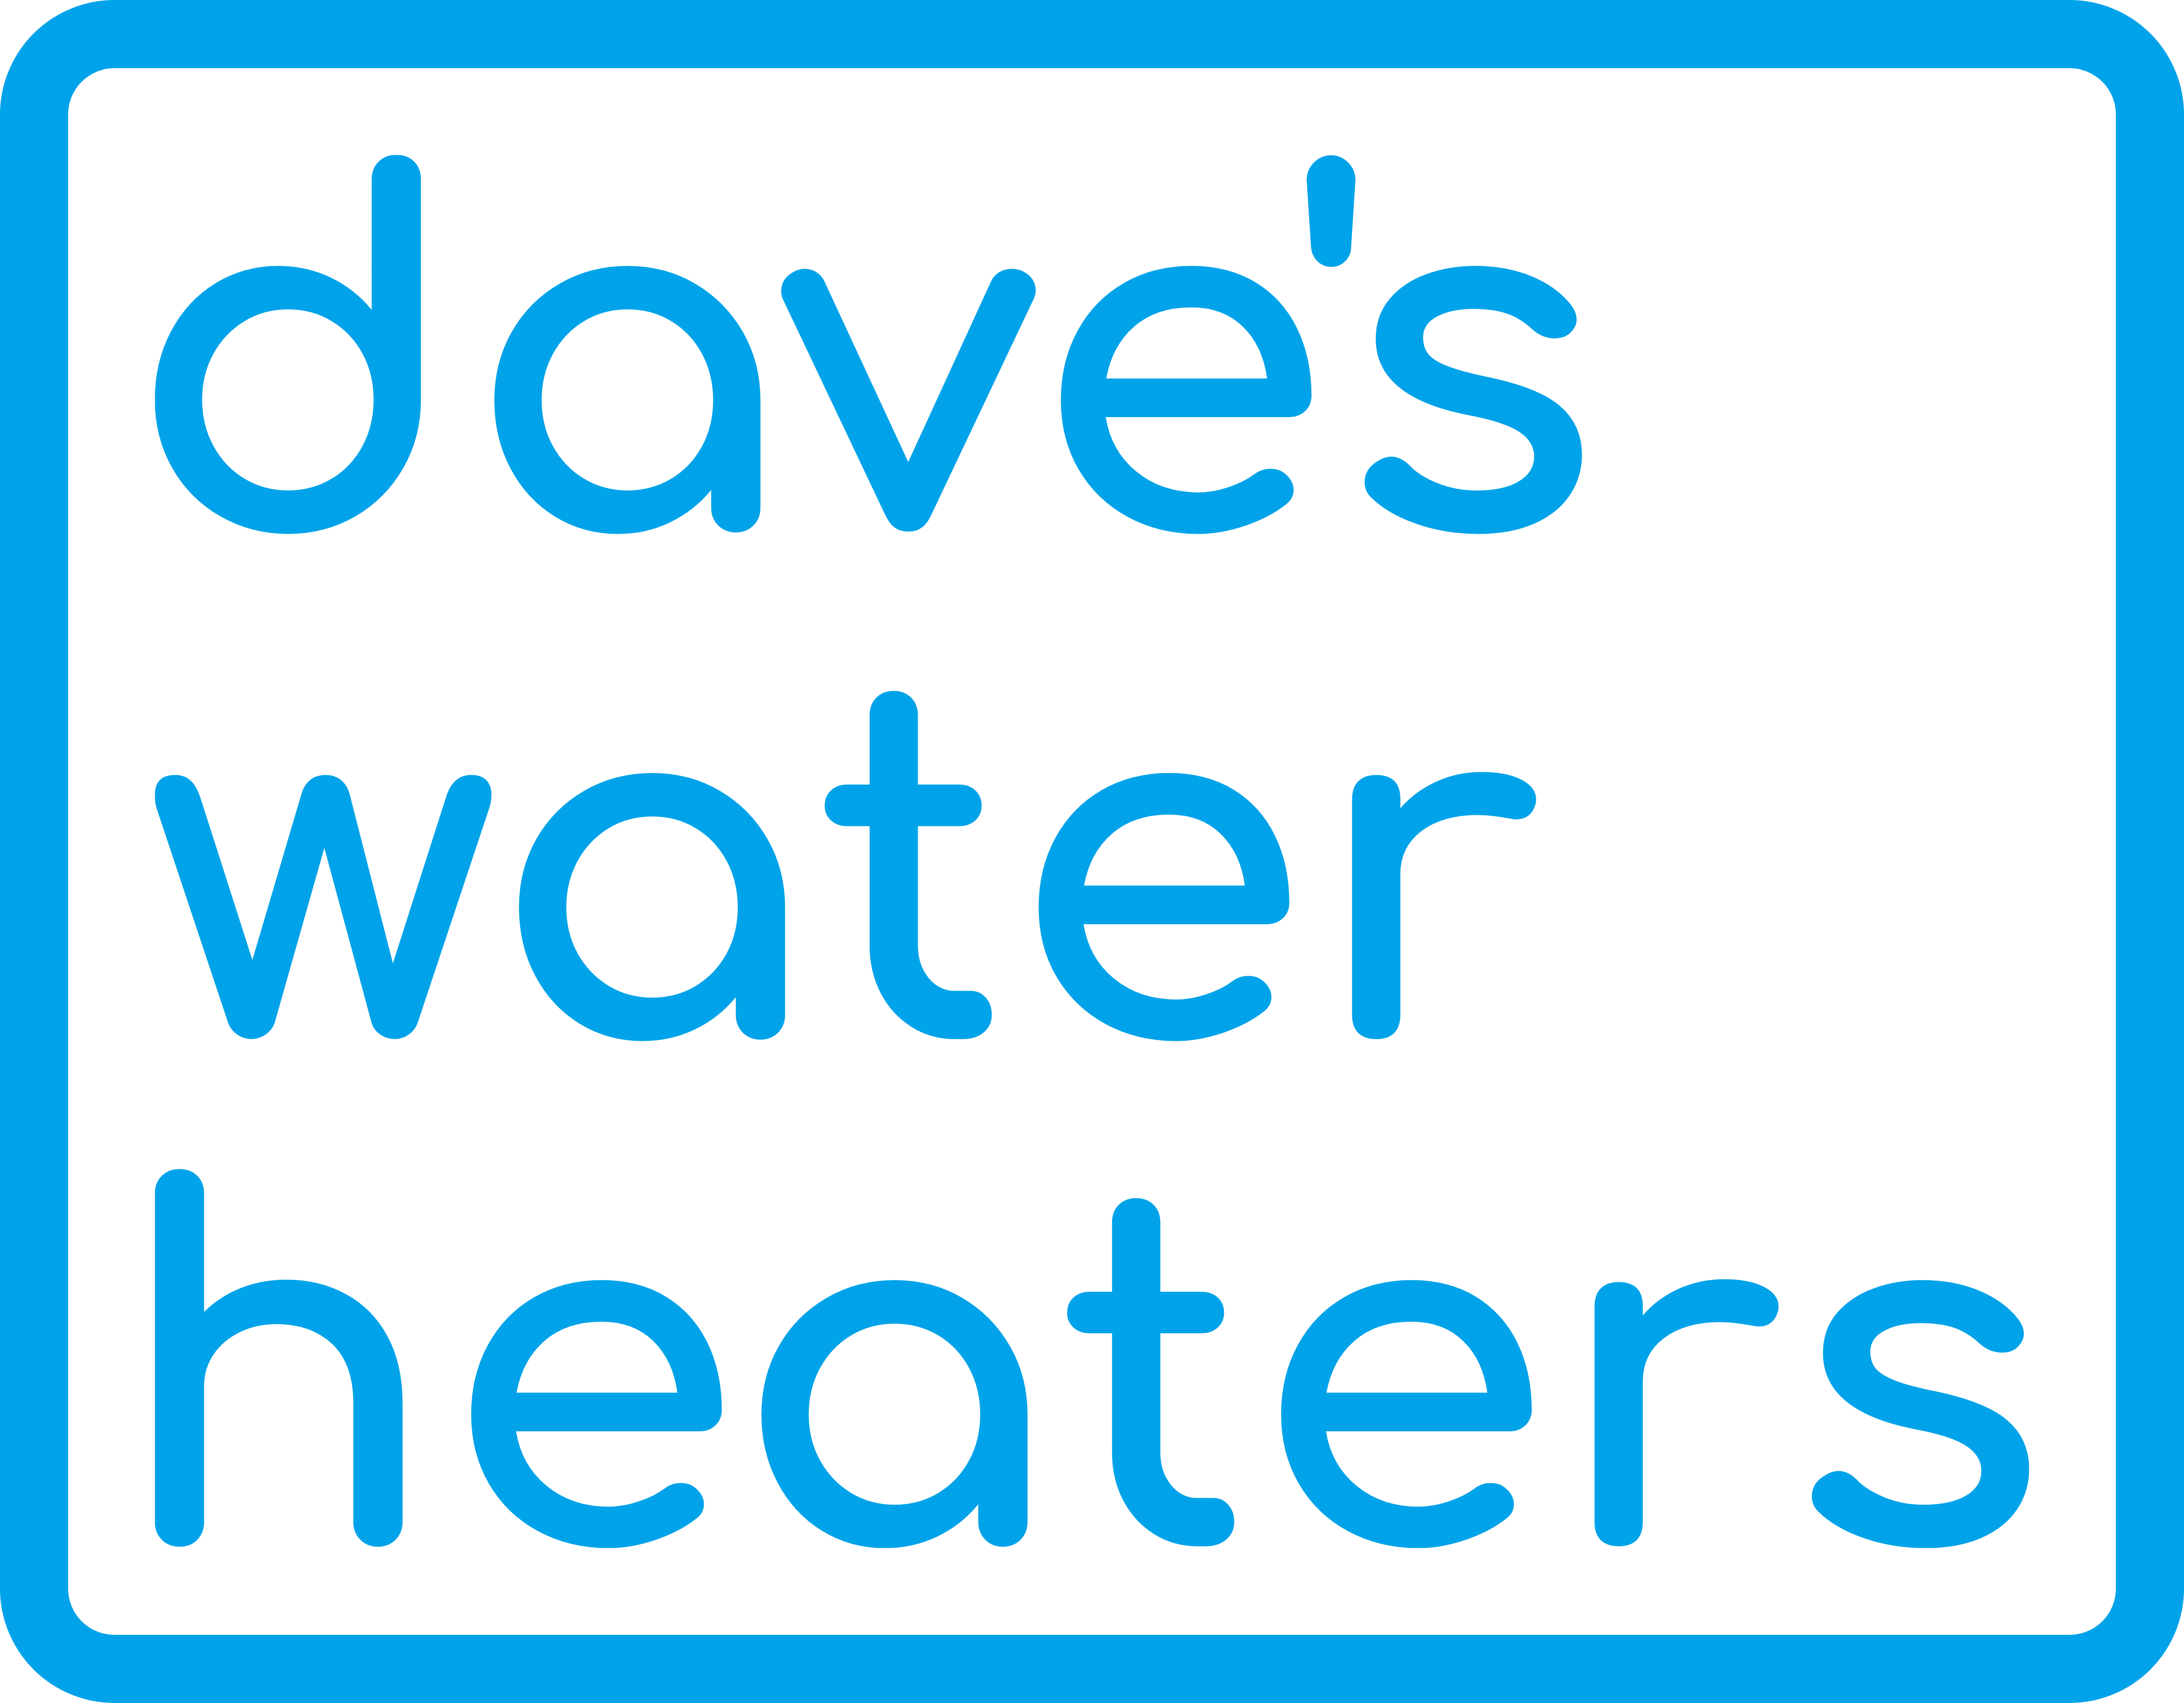 Dave's Water Heaters LLC Logo